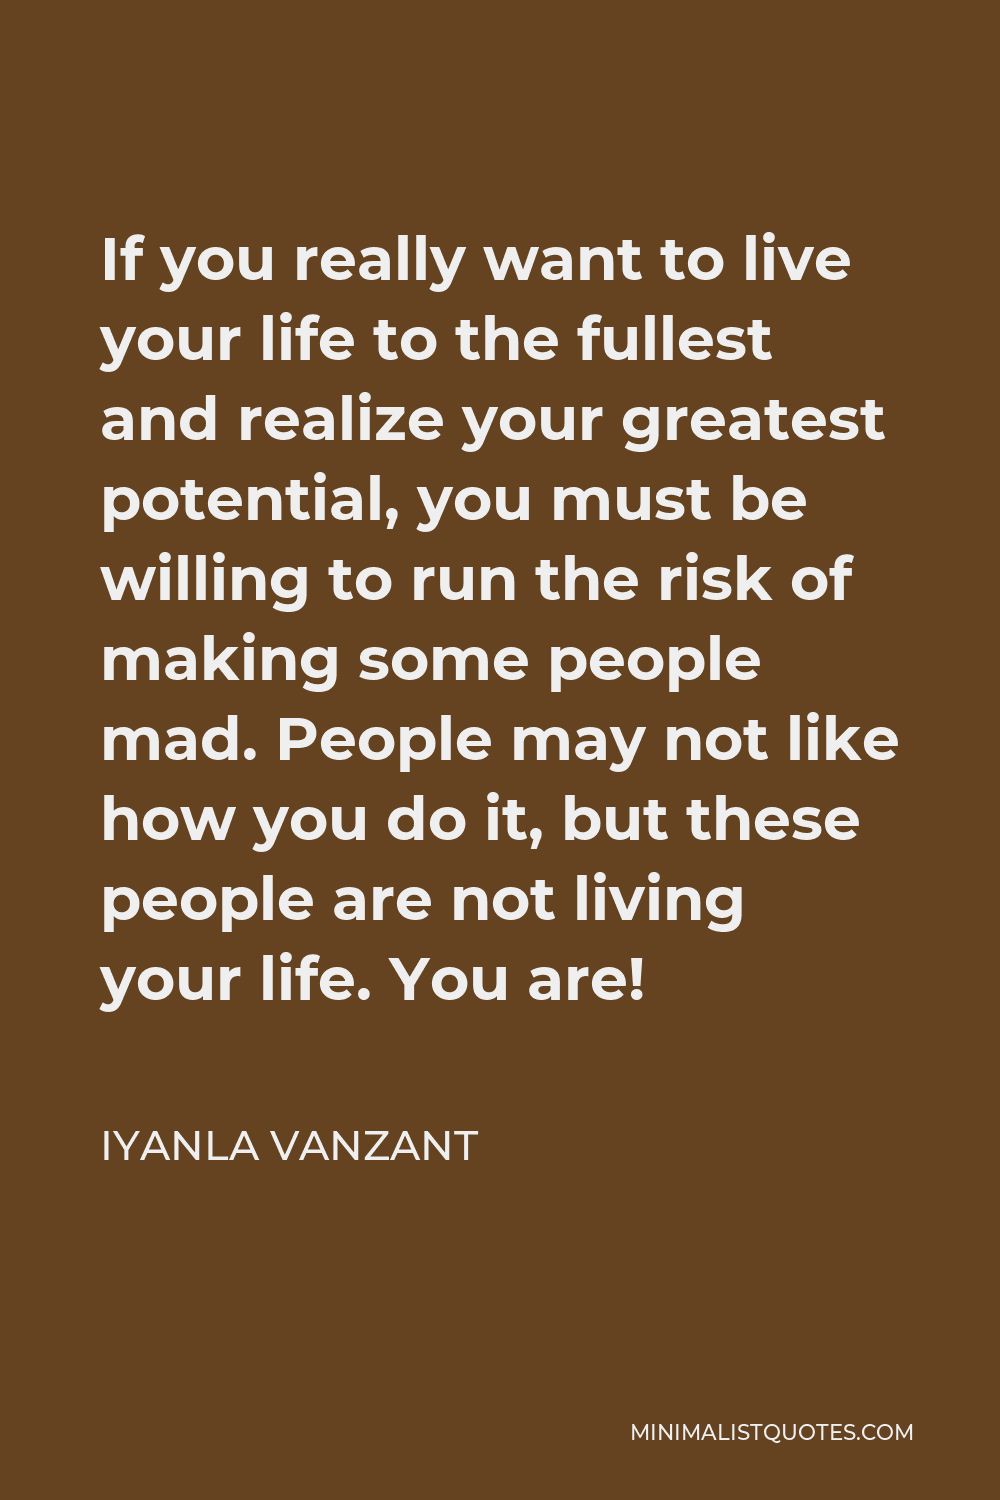 Iyanla Vanzant Quote - If you really want to live your life to the fullest and realize your greatest potential, you must be willing to run the risk of making some people mad. People may not like how you do it, but these people are not living your life. You are!